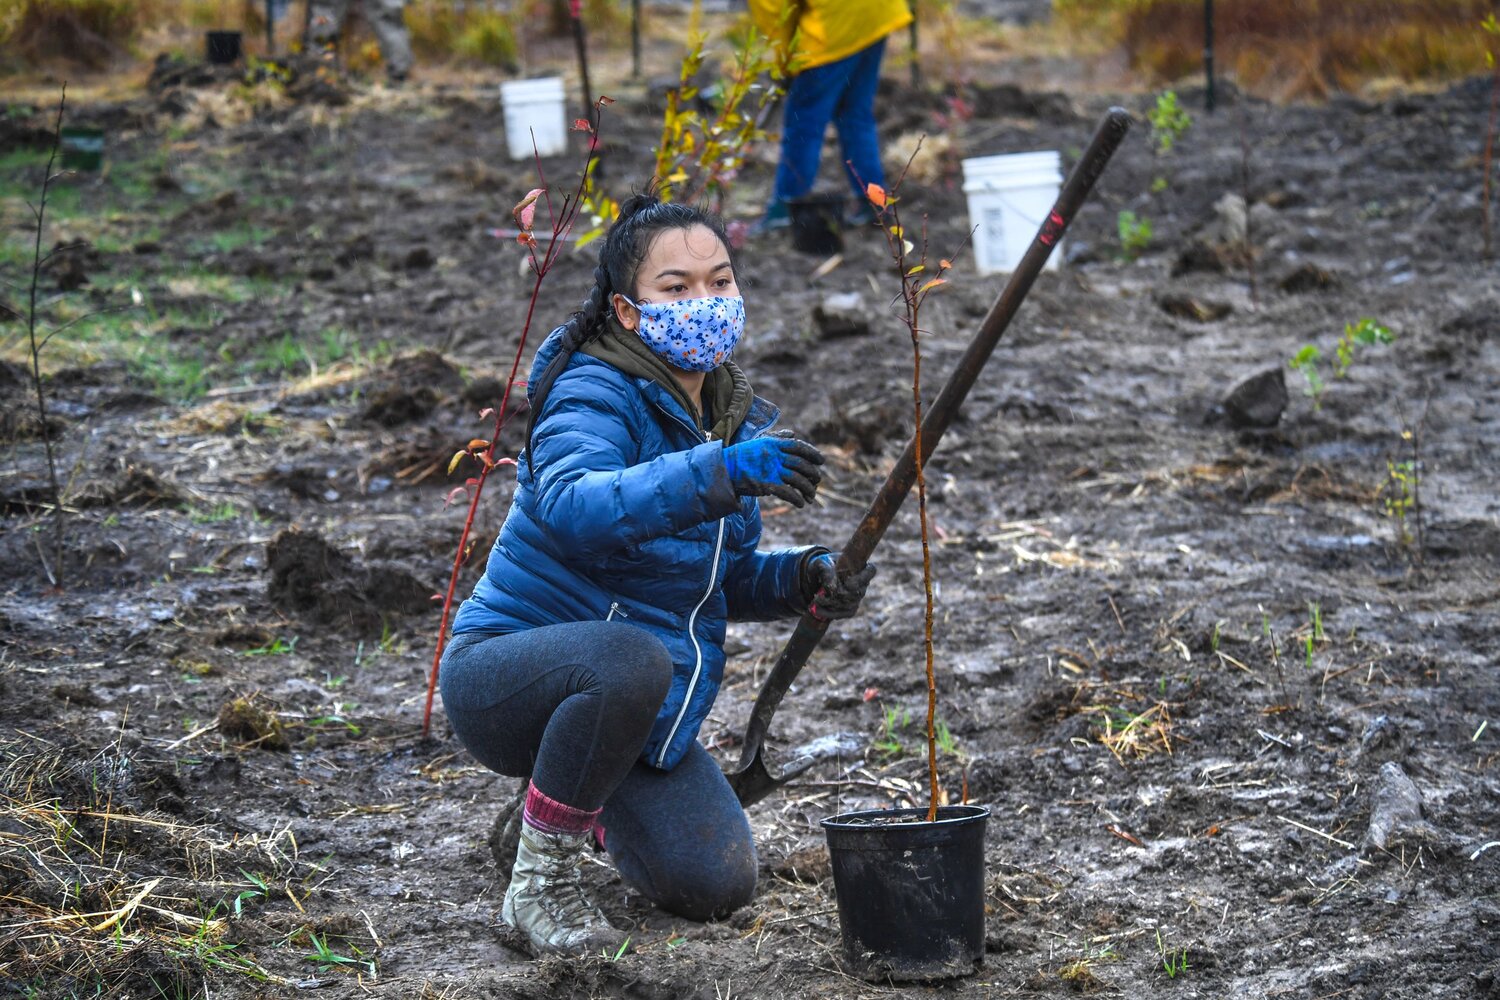 Woman at the tree planting event holding a shovel.